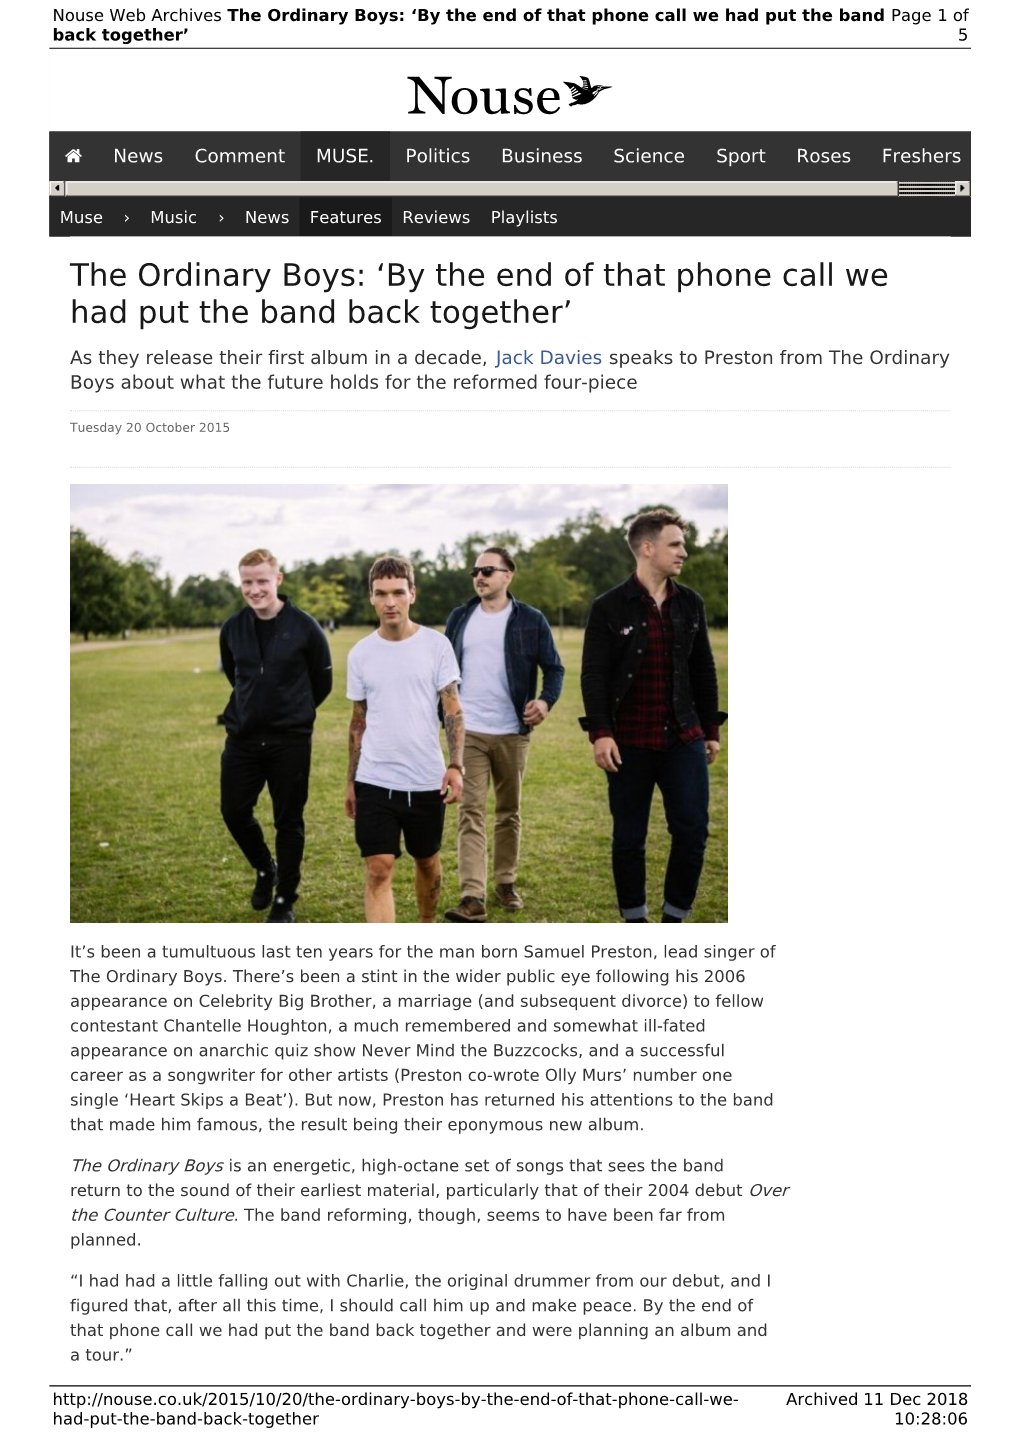 The Ordinary Boys: ‘By the End of That Phone Call We Had Put the Band Page 1 of Back Together’ 5